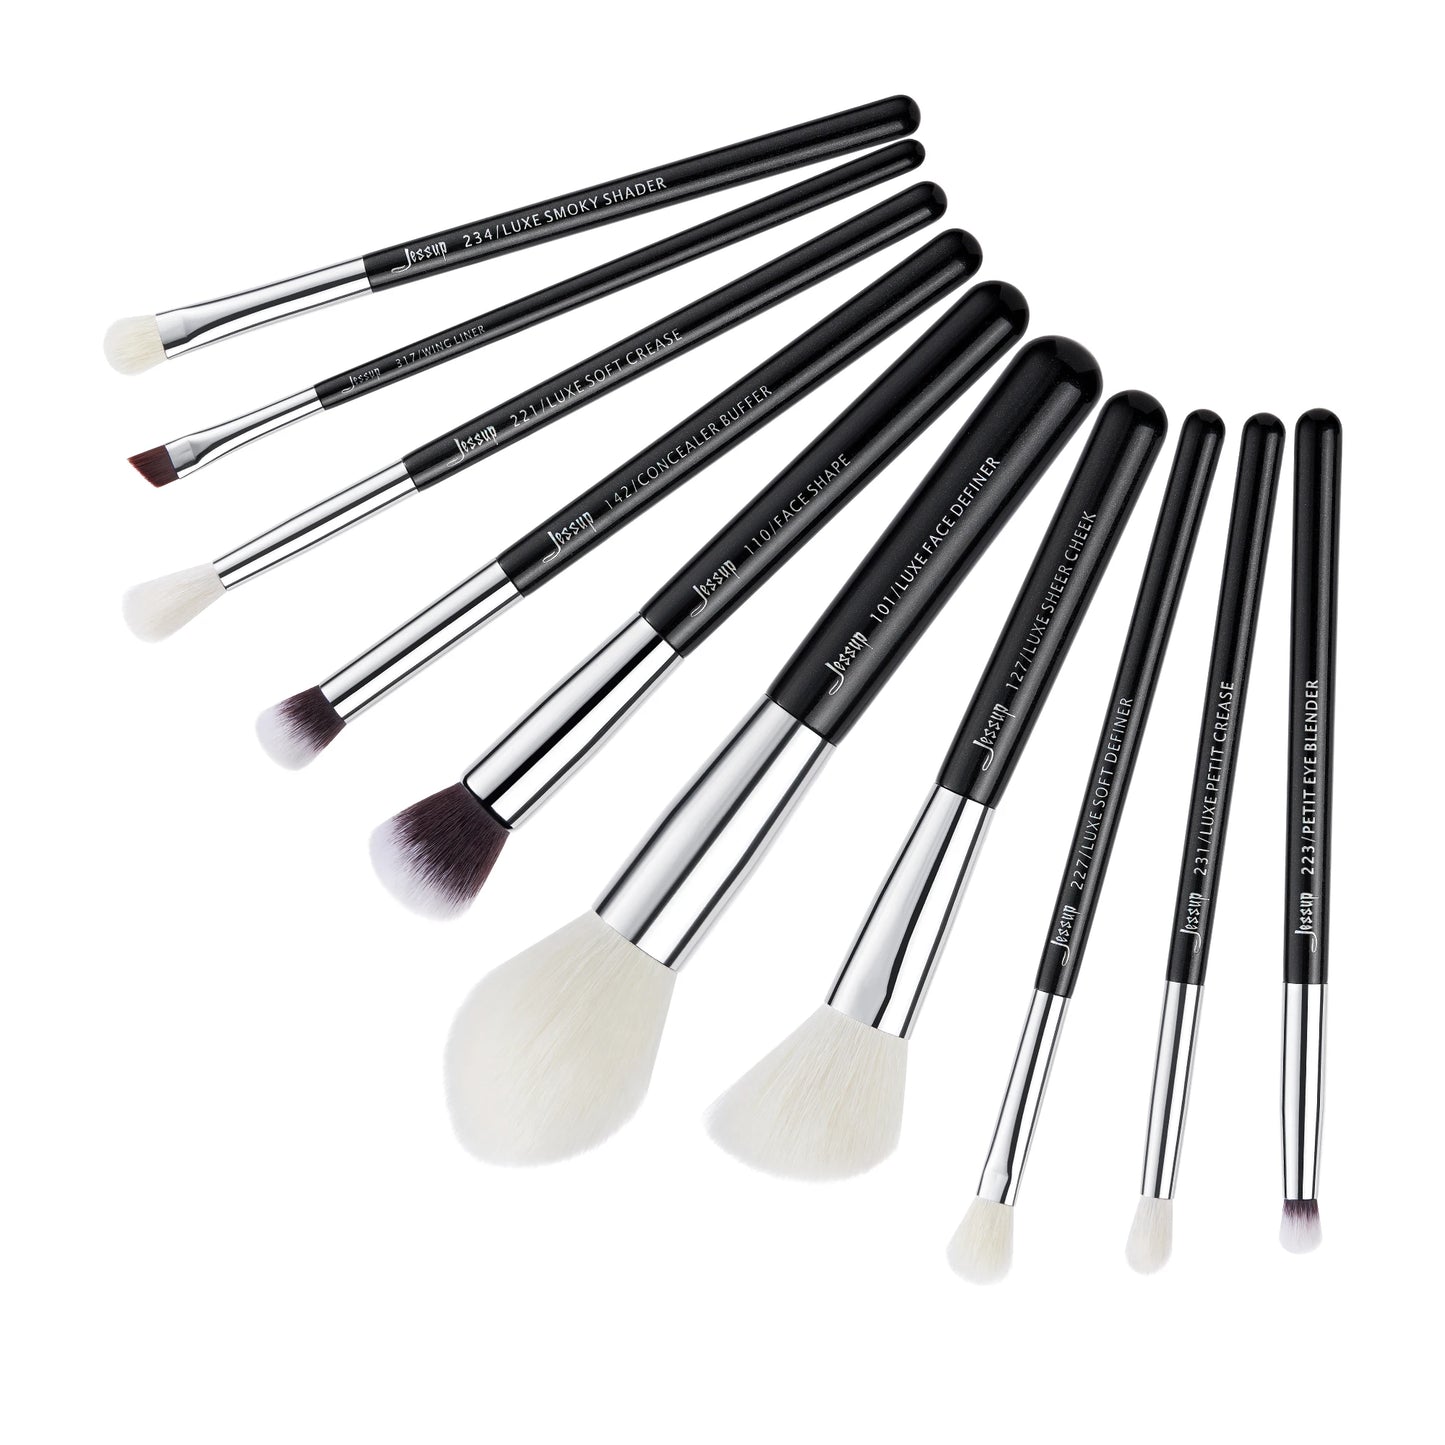 Jessup Cosmetic Brush Set: 10 Pieces